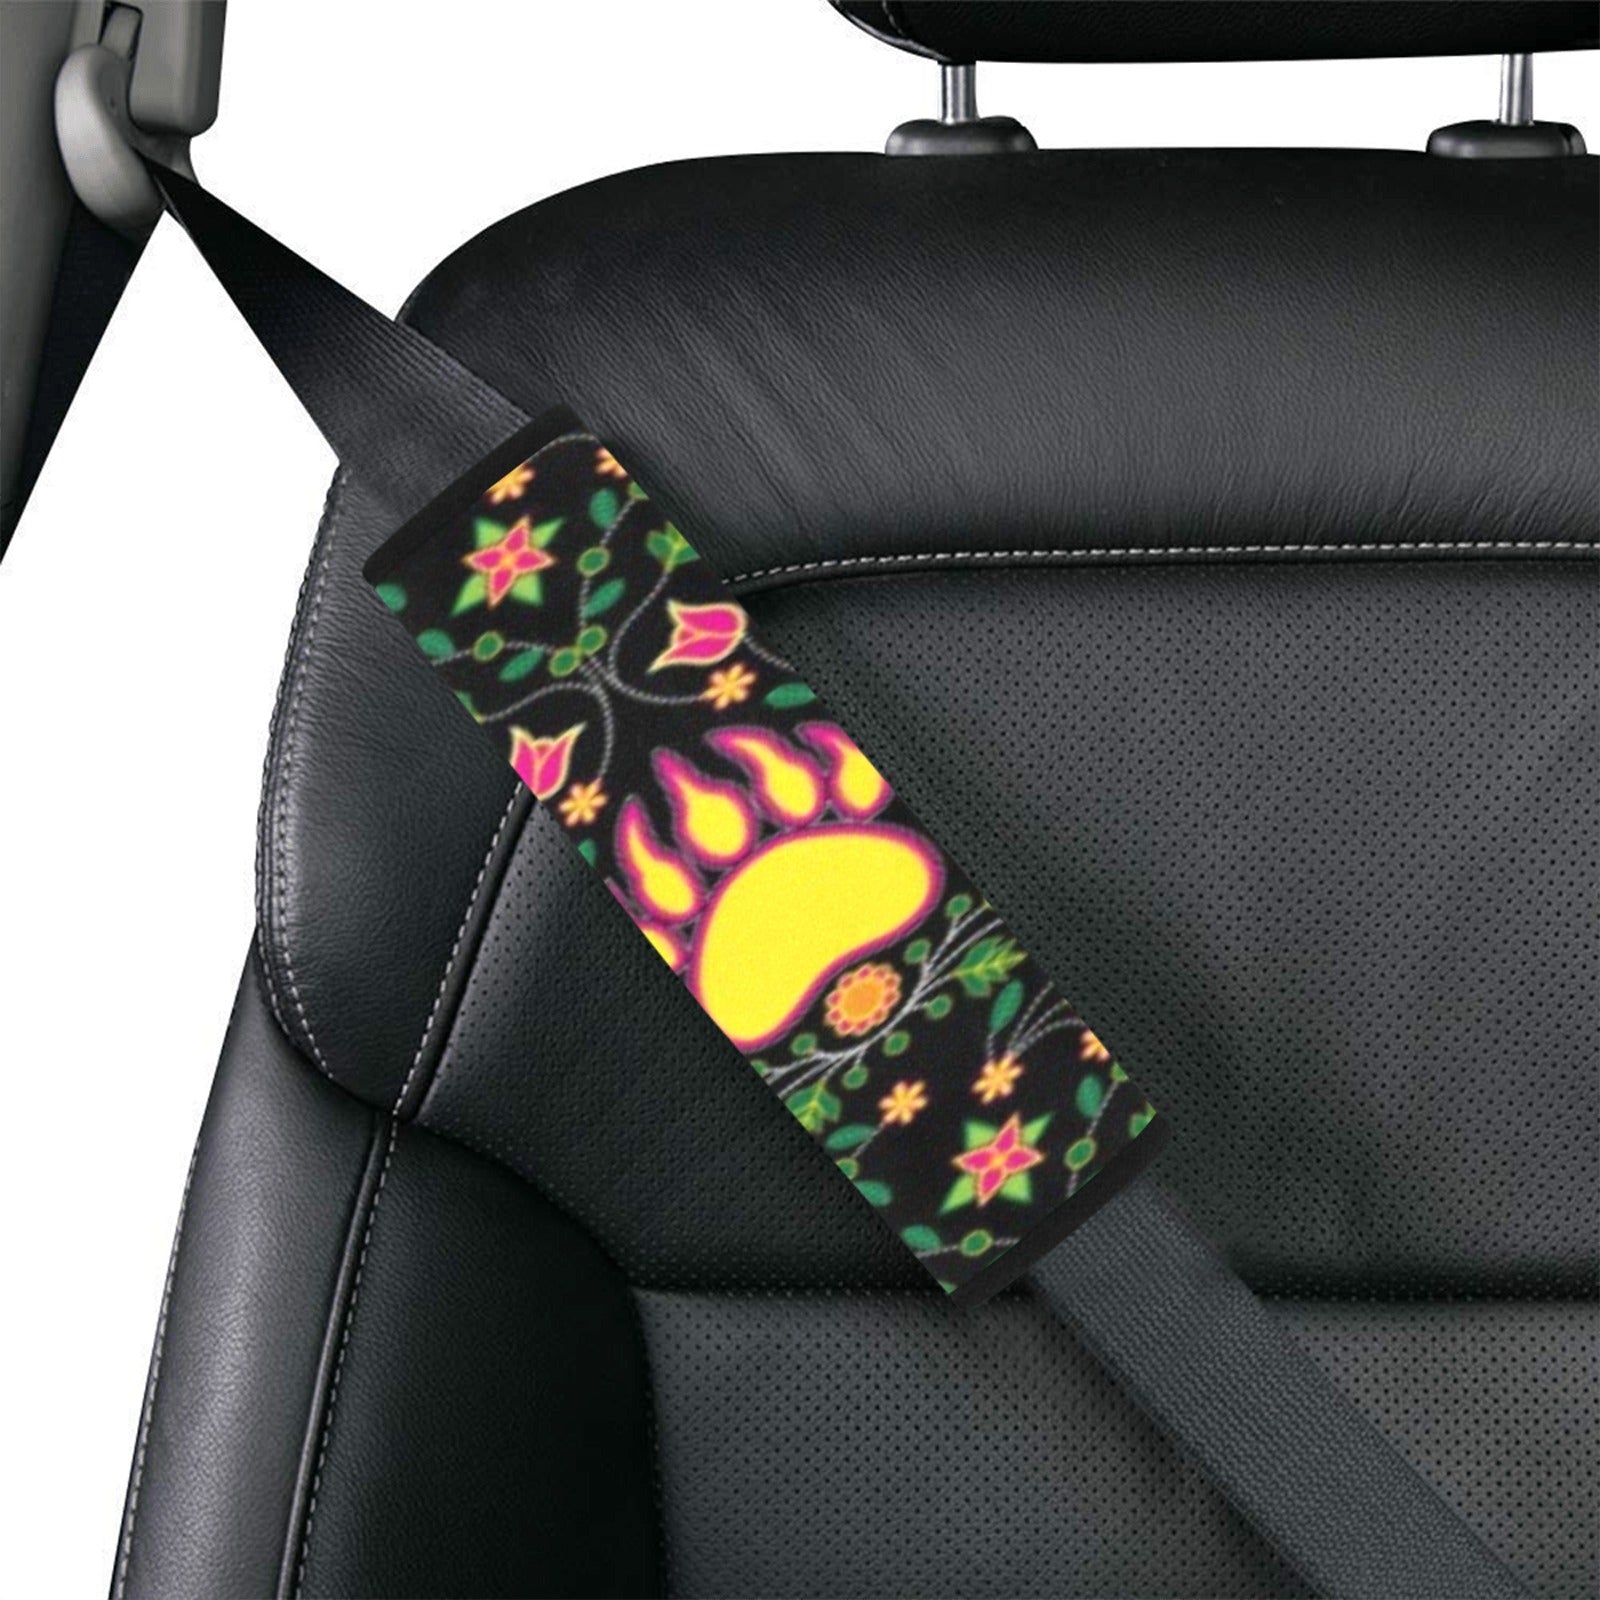 Floral Bearpaw Pink and Yellow Car Seat Belt Cover 7''x12.6'' (Pack of 2) Car Seat Belt Cover 7x12.6 (Pack of 2) e-joyer 